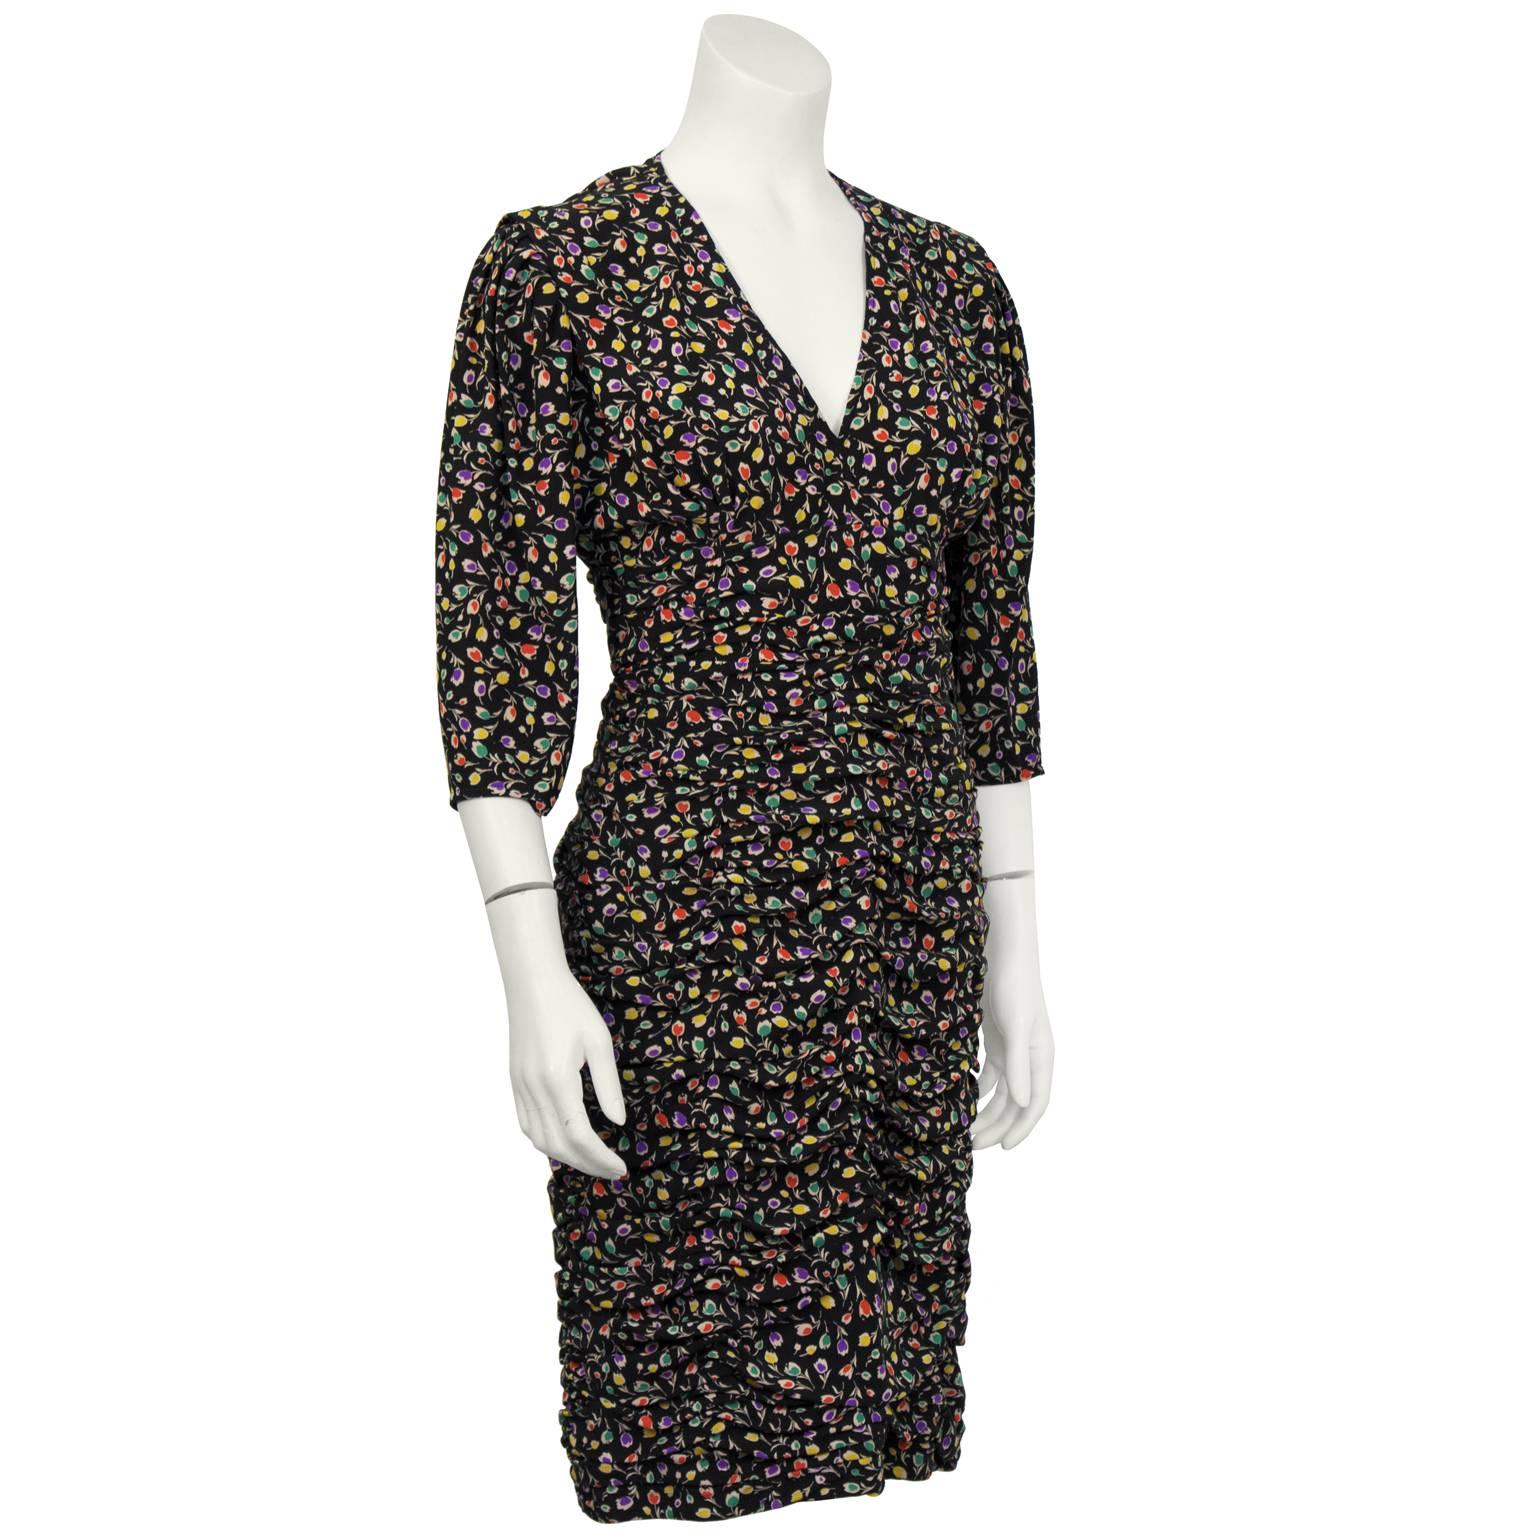 Iconic Ungaro black floral cocktail dress from the 1980's. The dress has a v-neckline and puffed ¾ sleeves finished with a black faceted button detail on the cuff. Typical Ungaro pick-up style ruching from the bust down to the hem. Zips up the back.